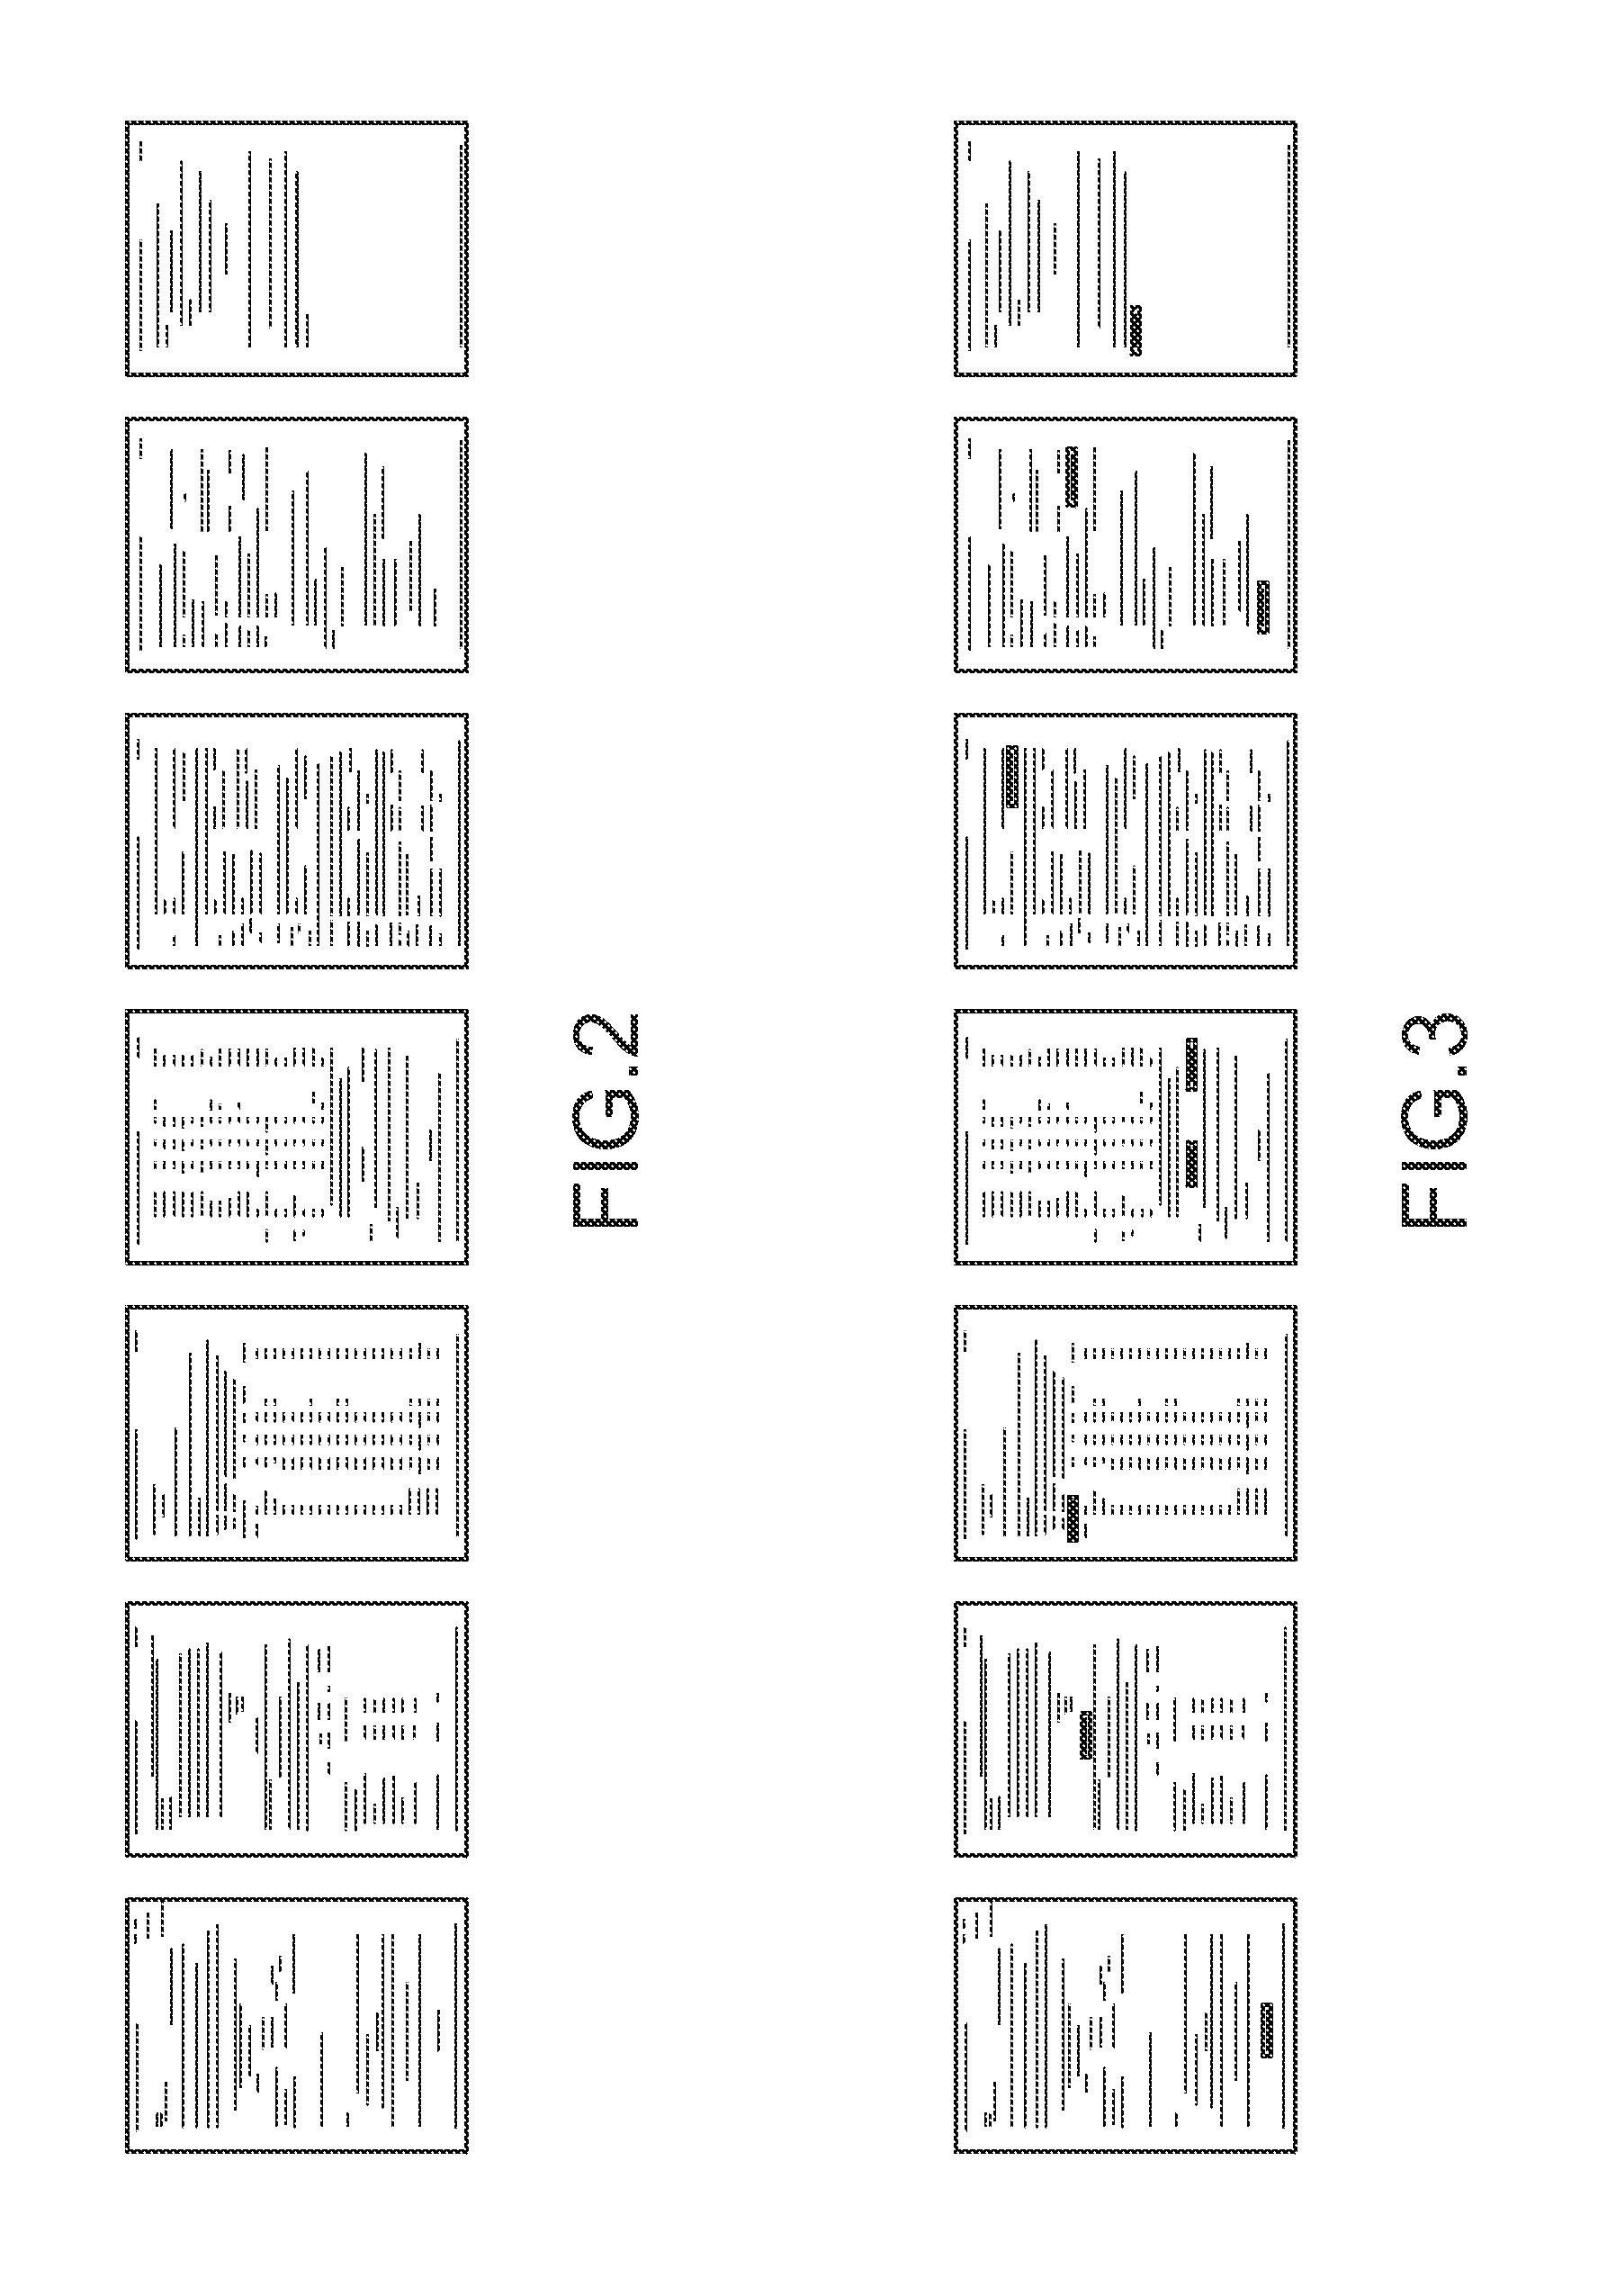 Apparatus and Method for Displaying Multiple Display Panels With a Progressive Relationship Using Cognitive Pattern Recognition